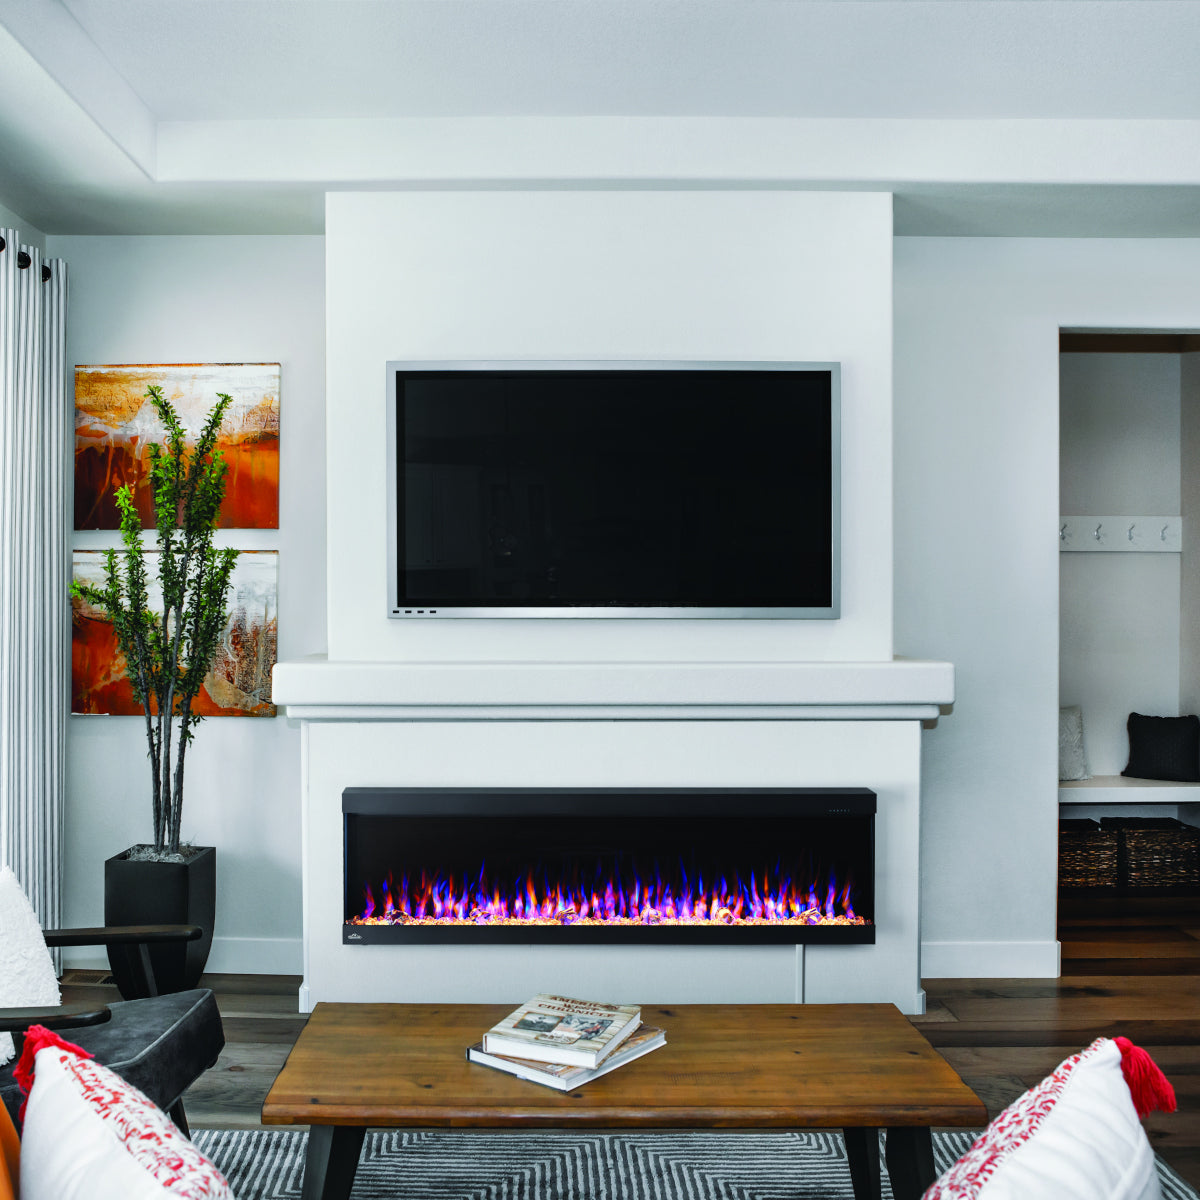 Napoleon Trivista Pictura 60" Wall-Mount Electric Fireplace NEFL60H-3SV with crystal media and mixed flames in living room